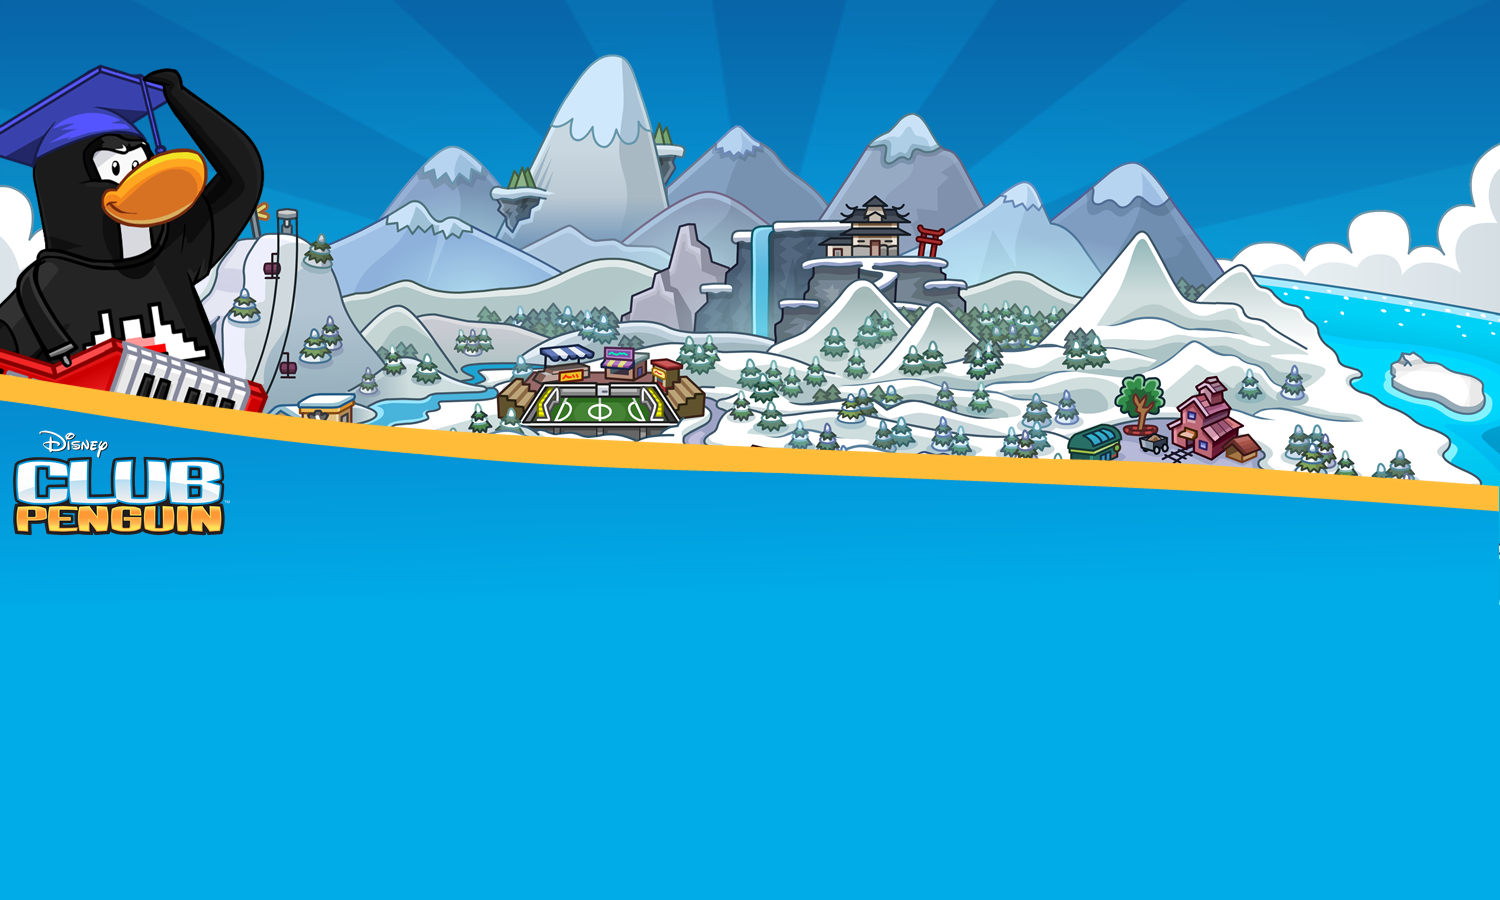 Free Club Penguin Twitter Backgrounds (Page: 1/2) | Everything ...